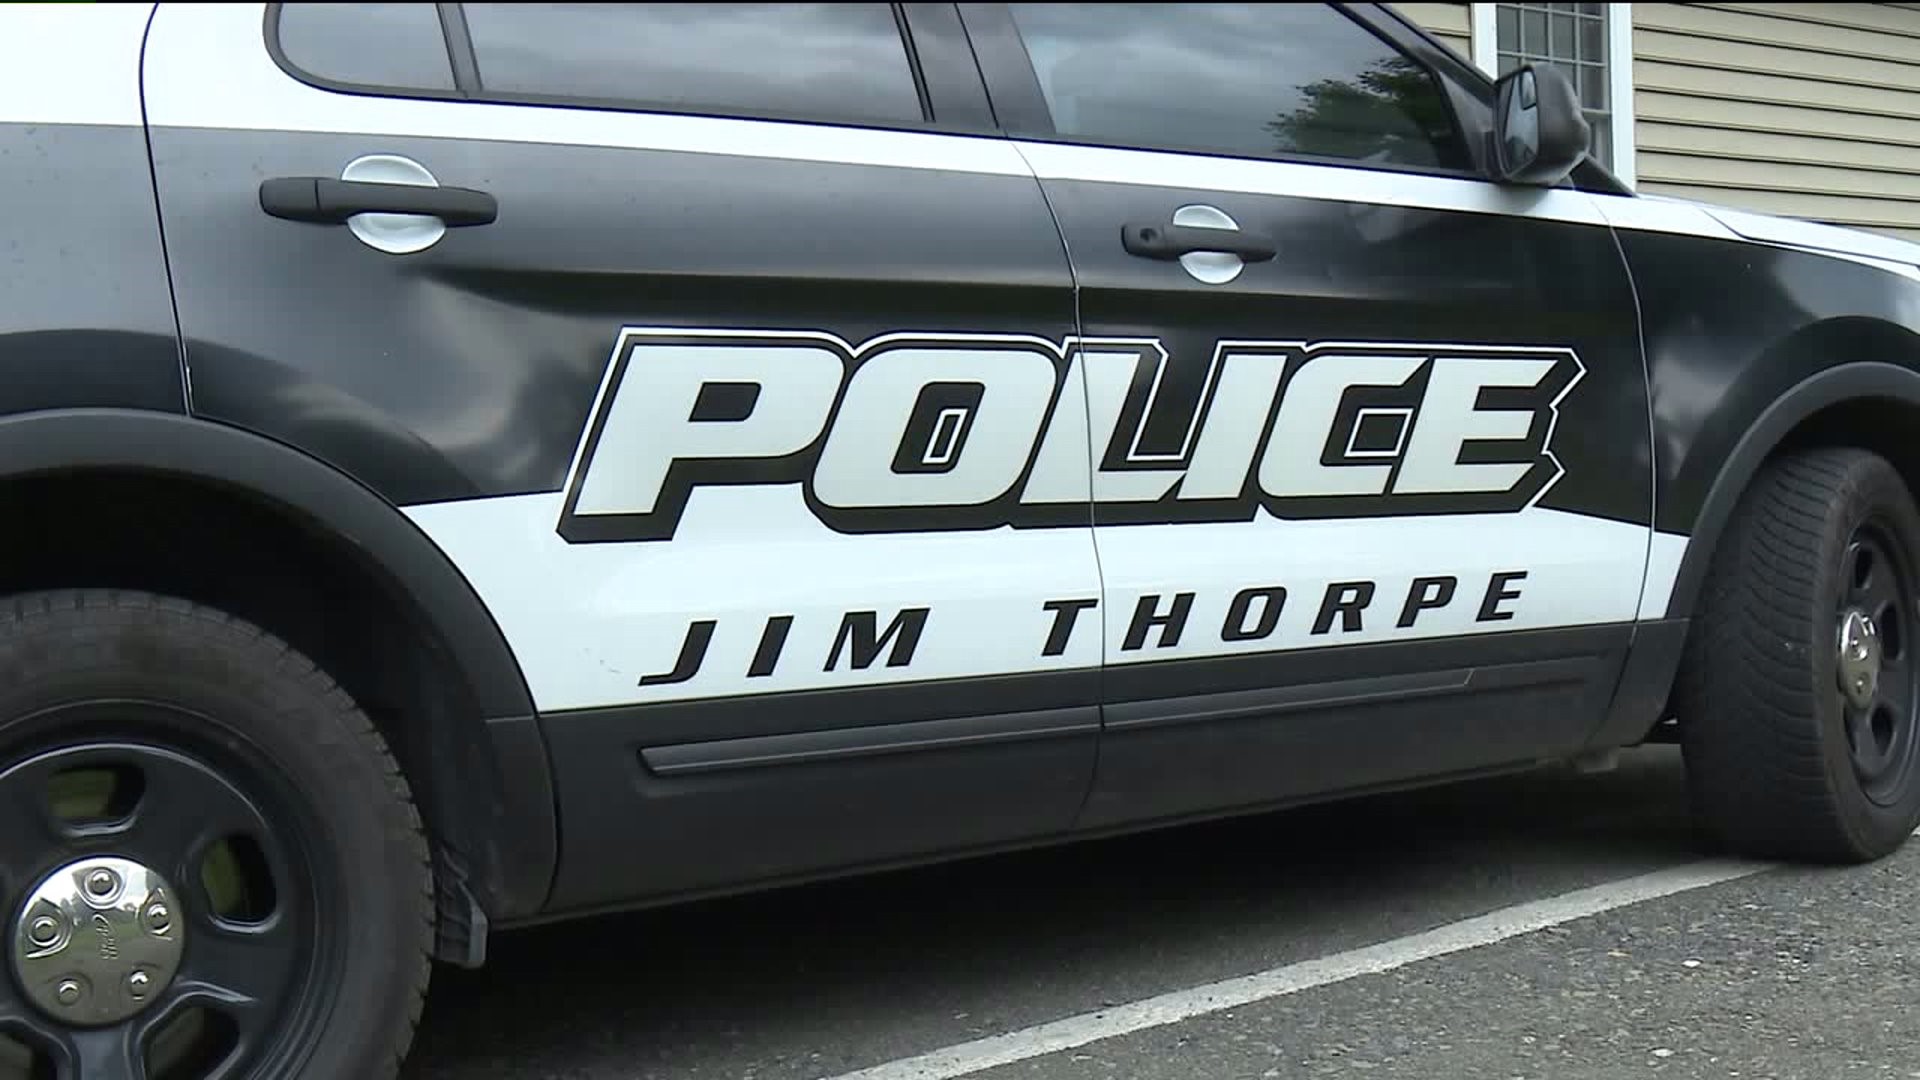 Vandals Damage Vehicles and Park in Jim Thorpe